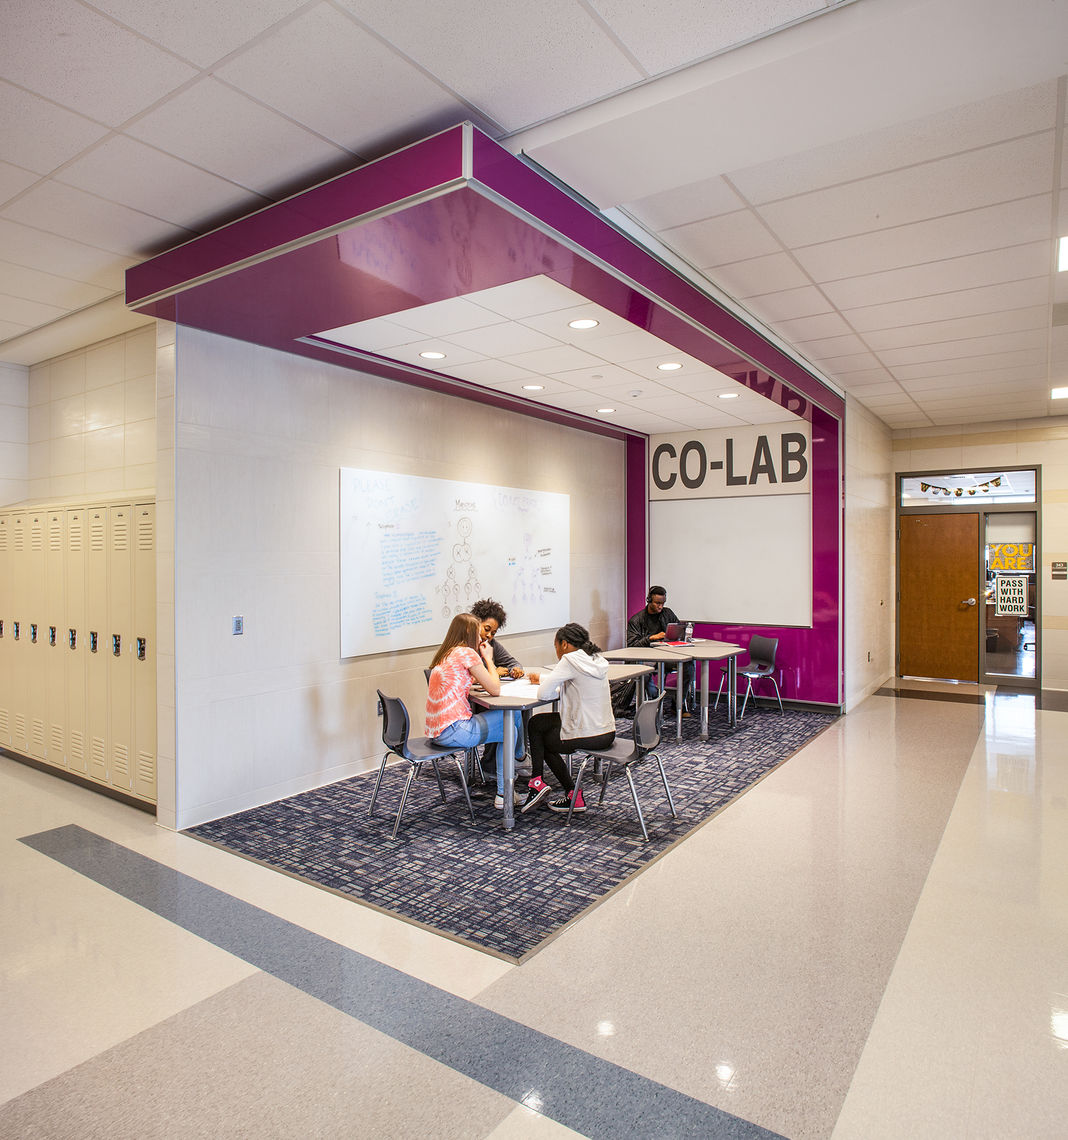 Collaboration Labs: Open and informal group learning spaces for up to 10 people that facilitate project-based learning and collaboration.